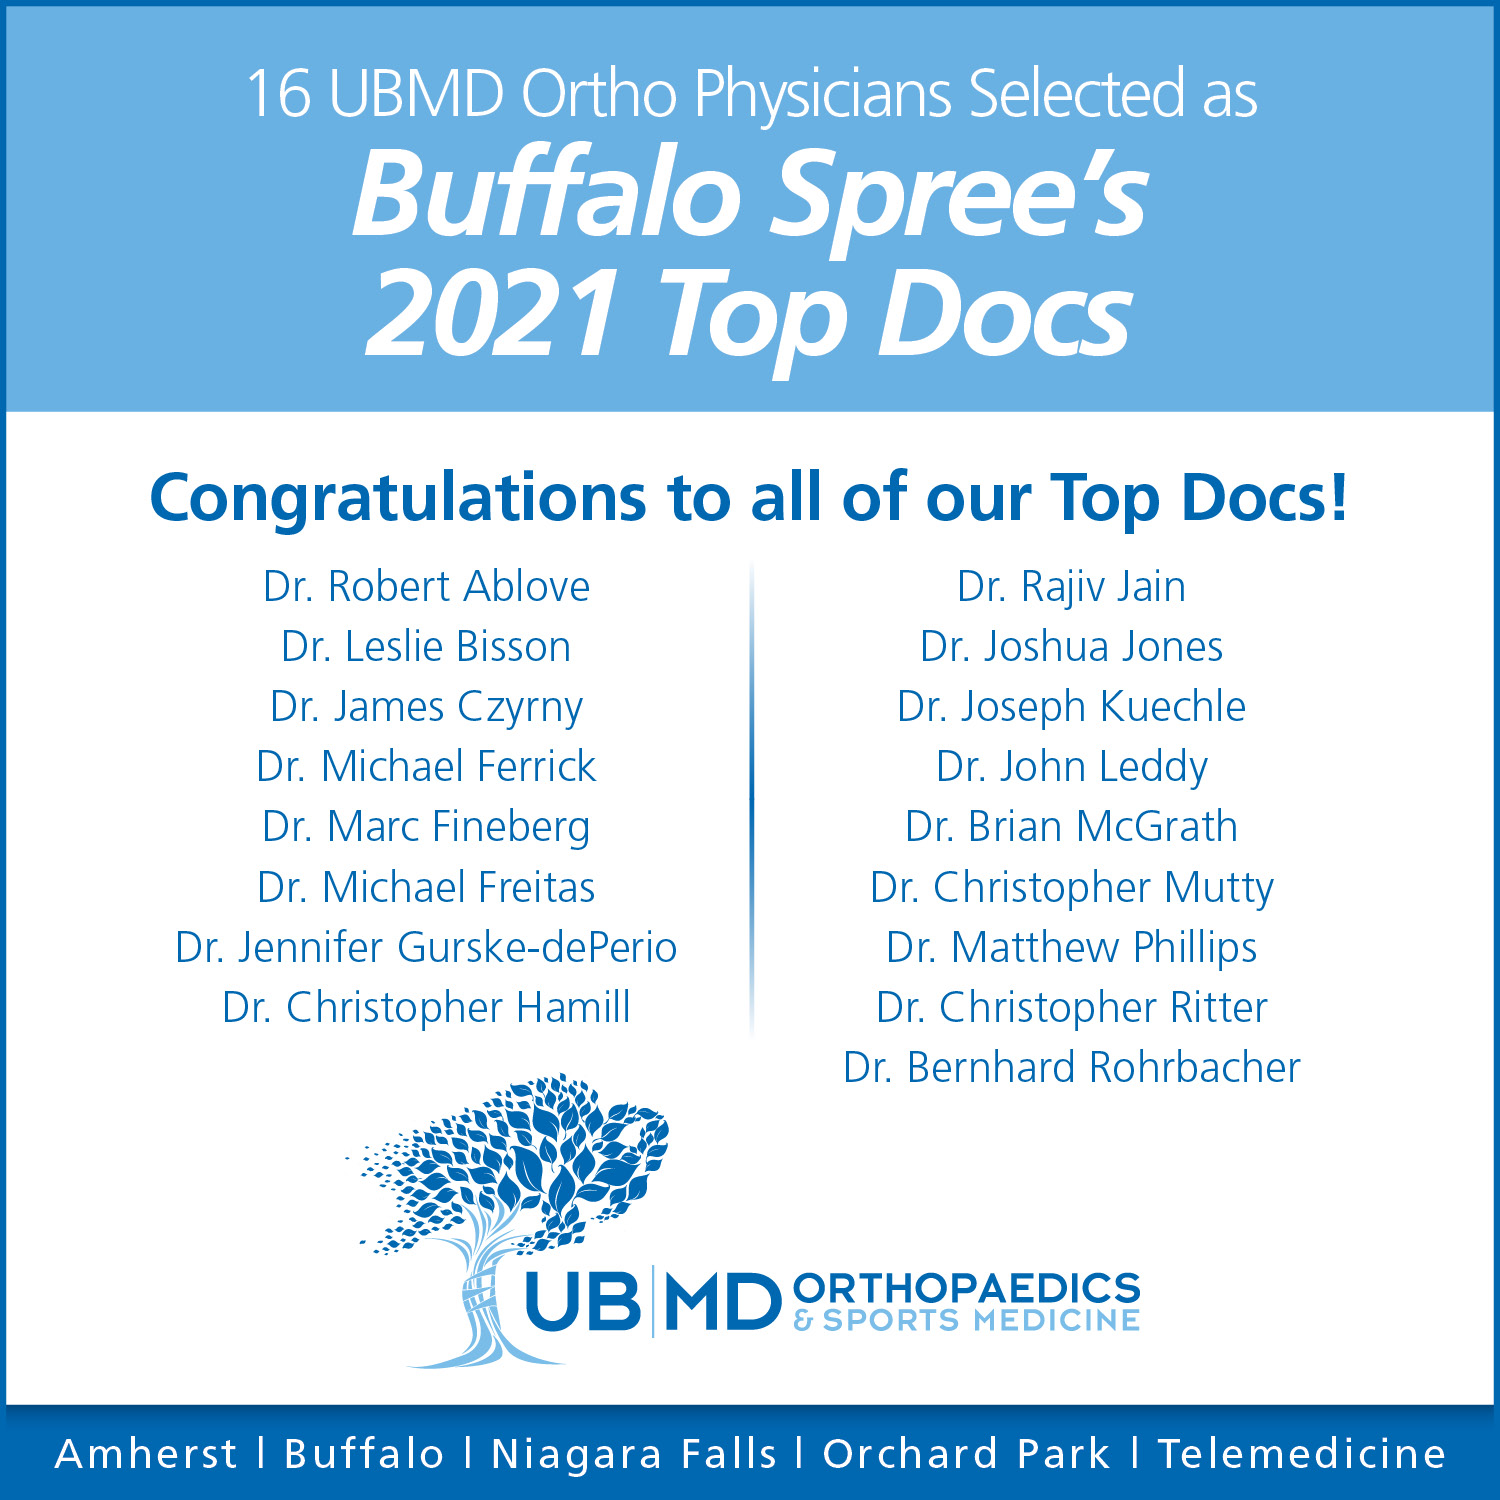 17 UBMD Ortho Physicians Selected as Buffalo Spree’s 2021 Top Docs